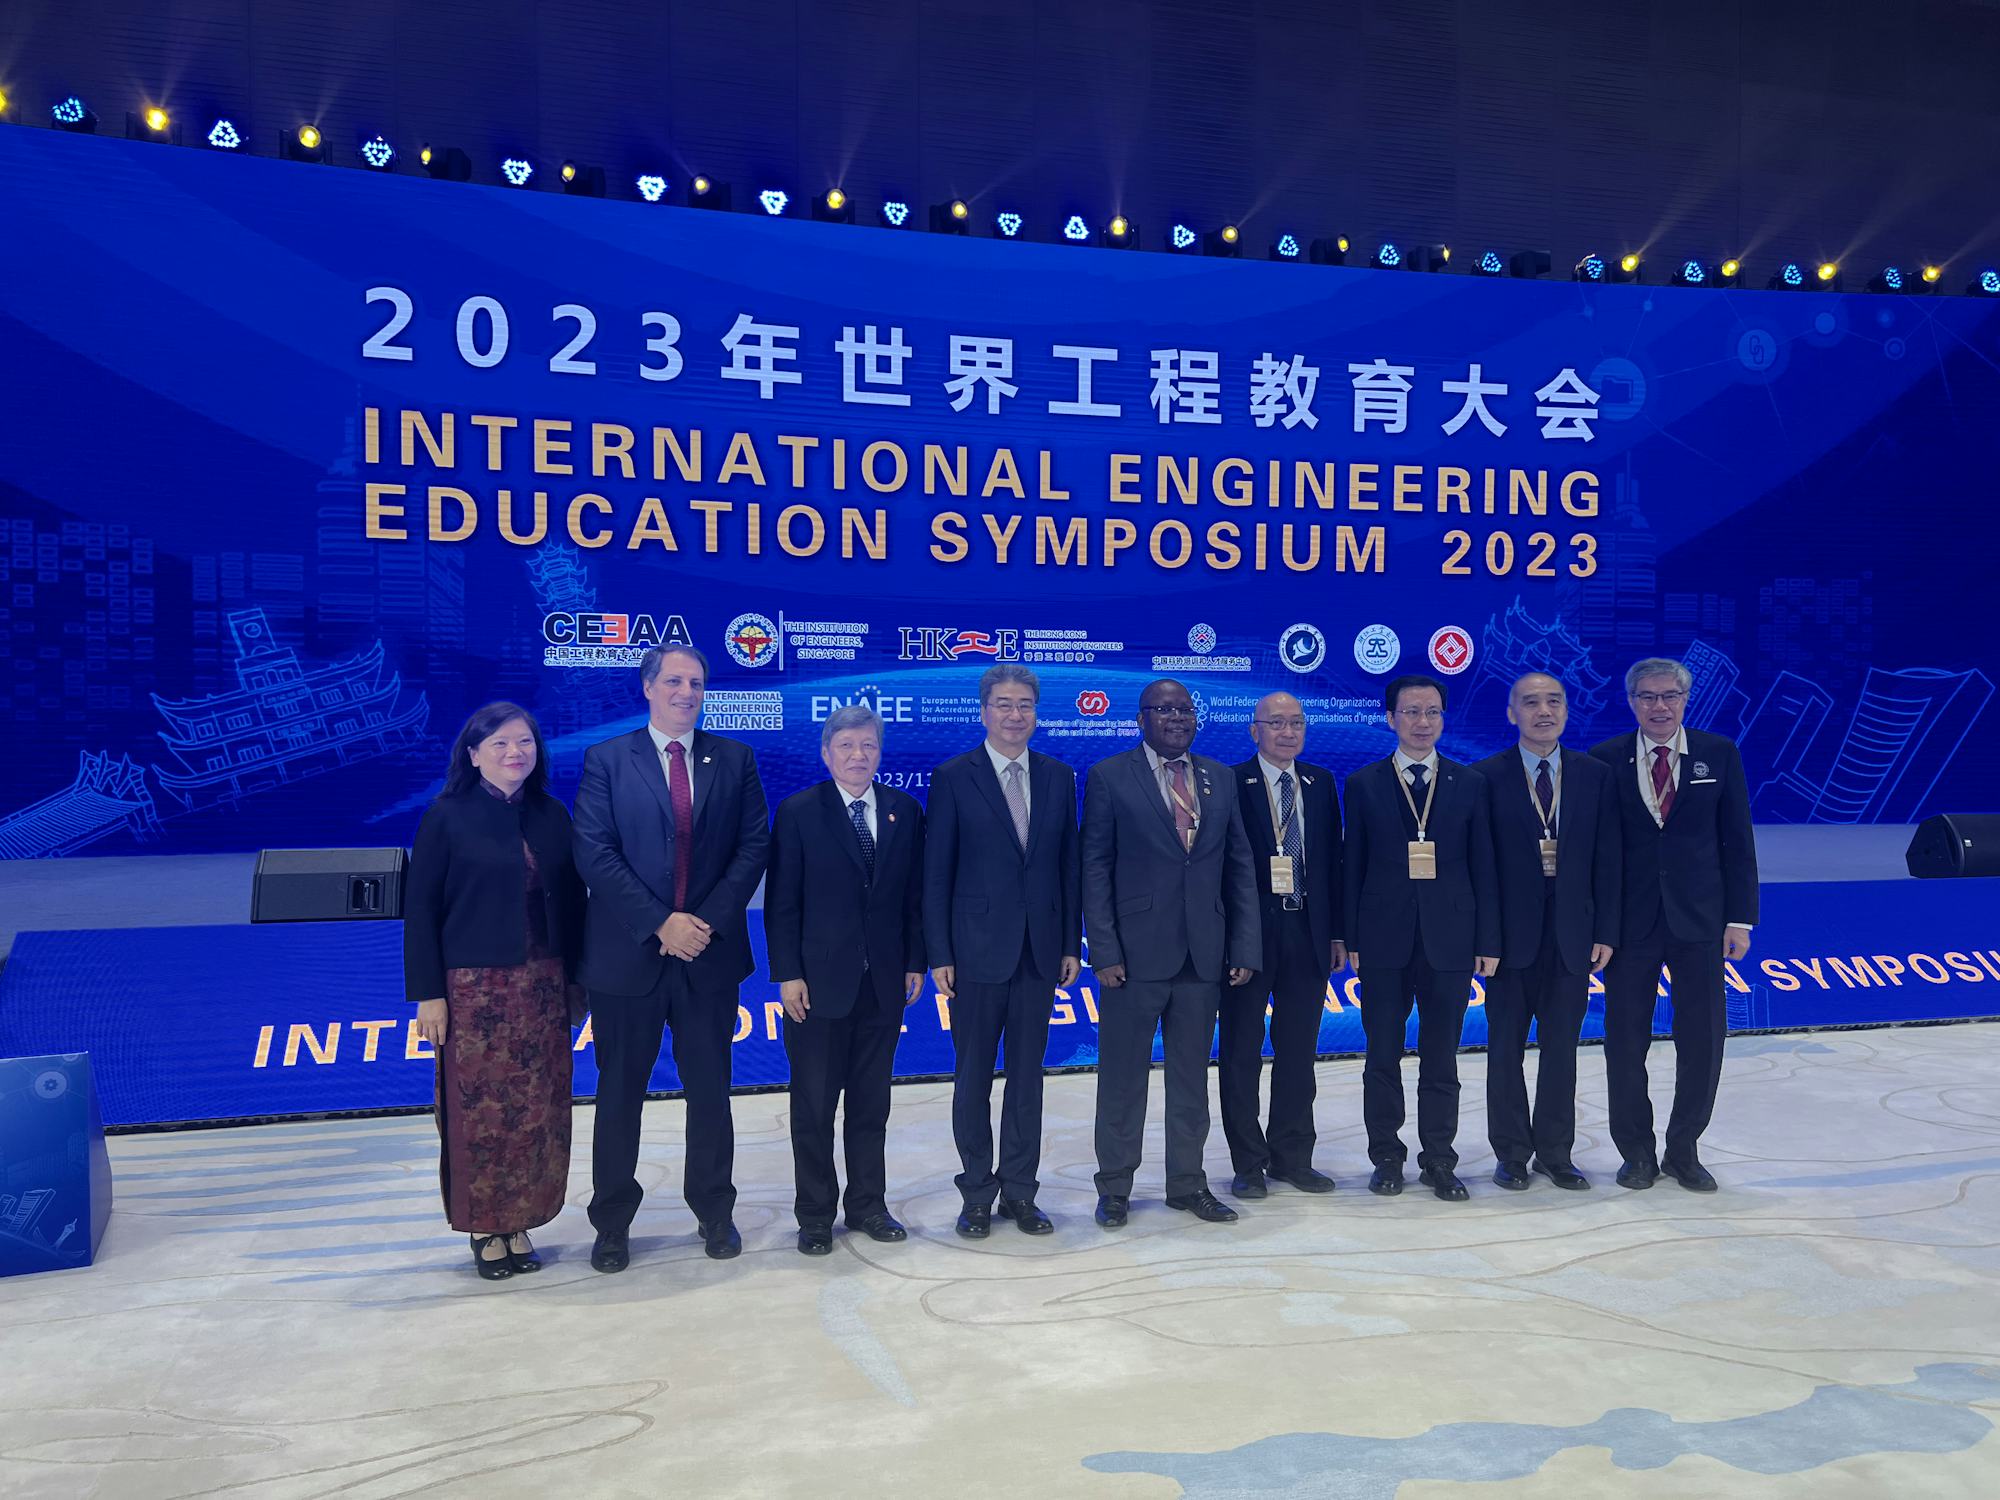 ENTER Network Spearheads Global Engineering Education Dialogue at China Symposium